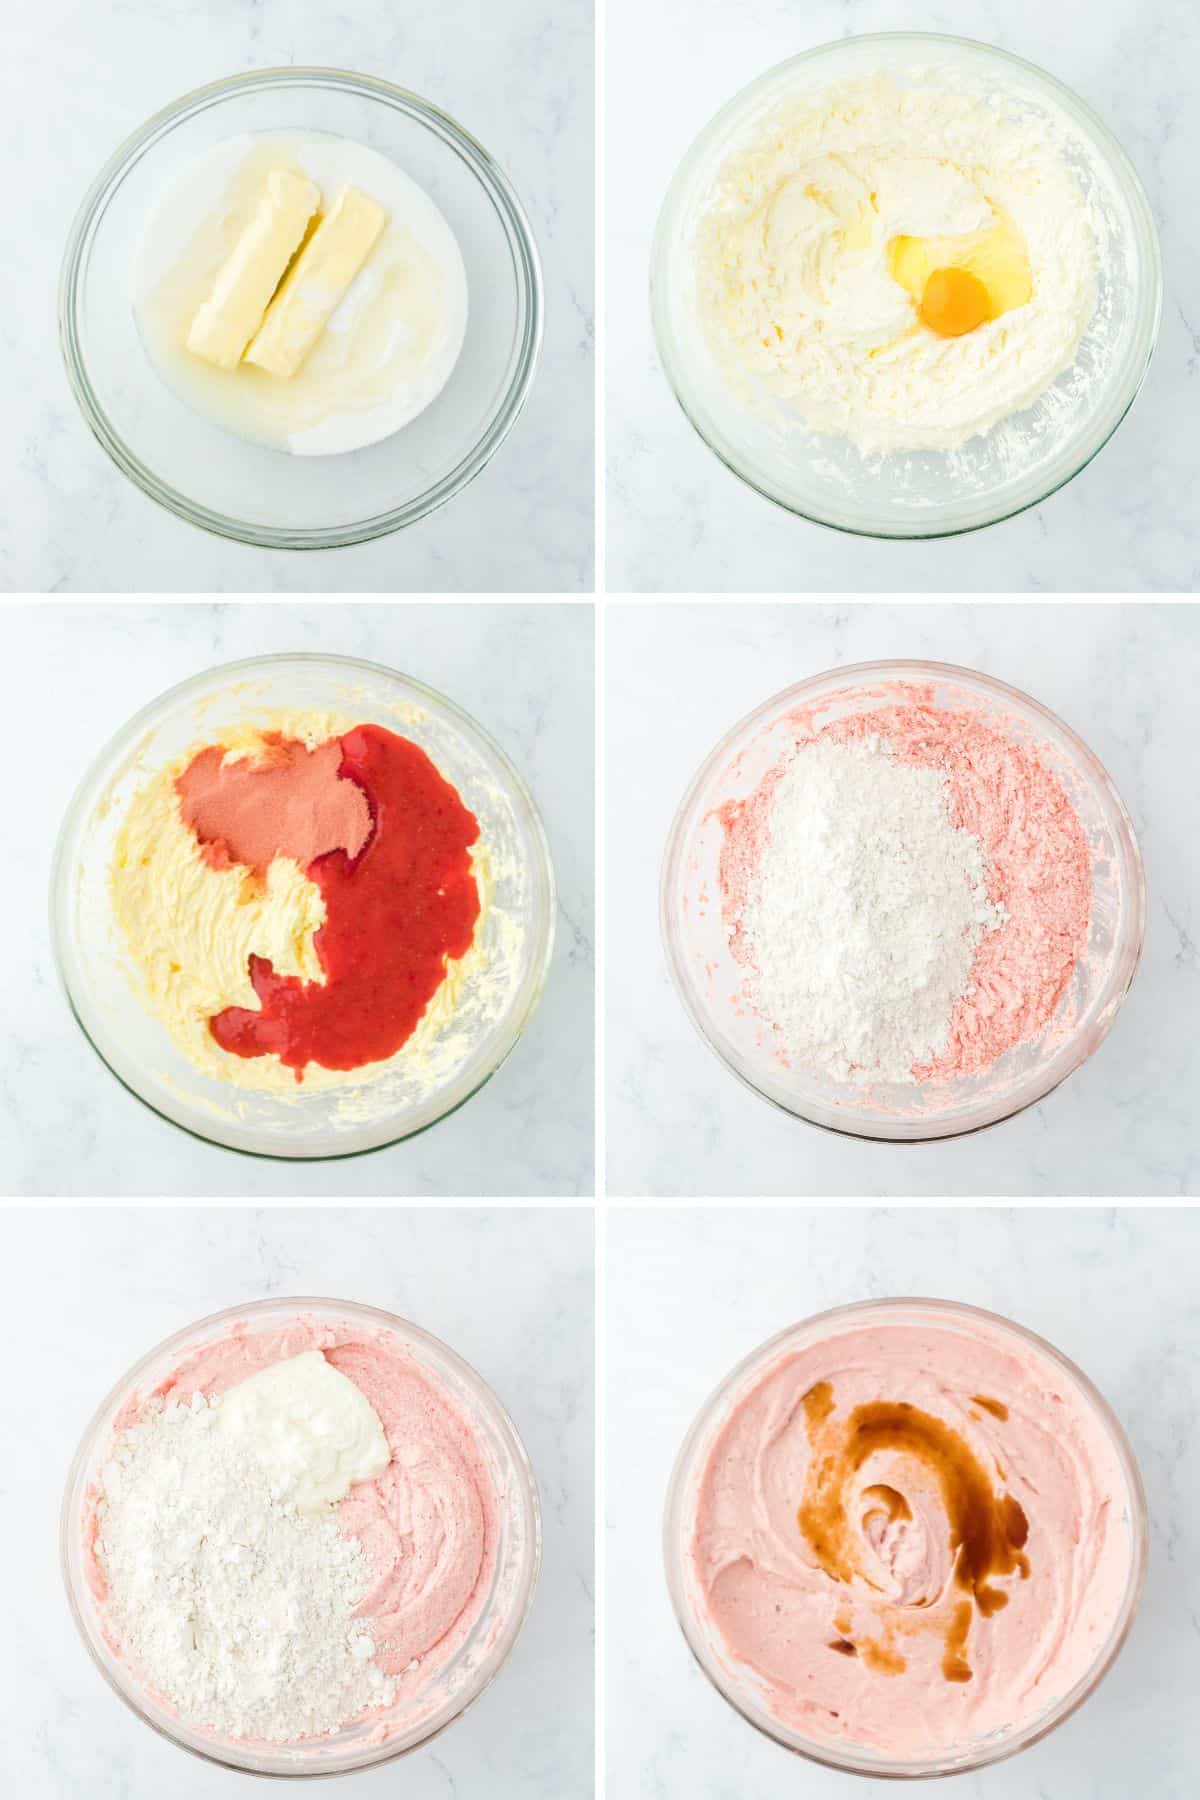 A collage showing the butter and sugar in a bowl, adding the eggs, adding the strawberries, adding the flour, the sour cream, and last the vanilla.